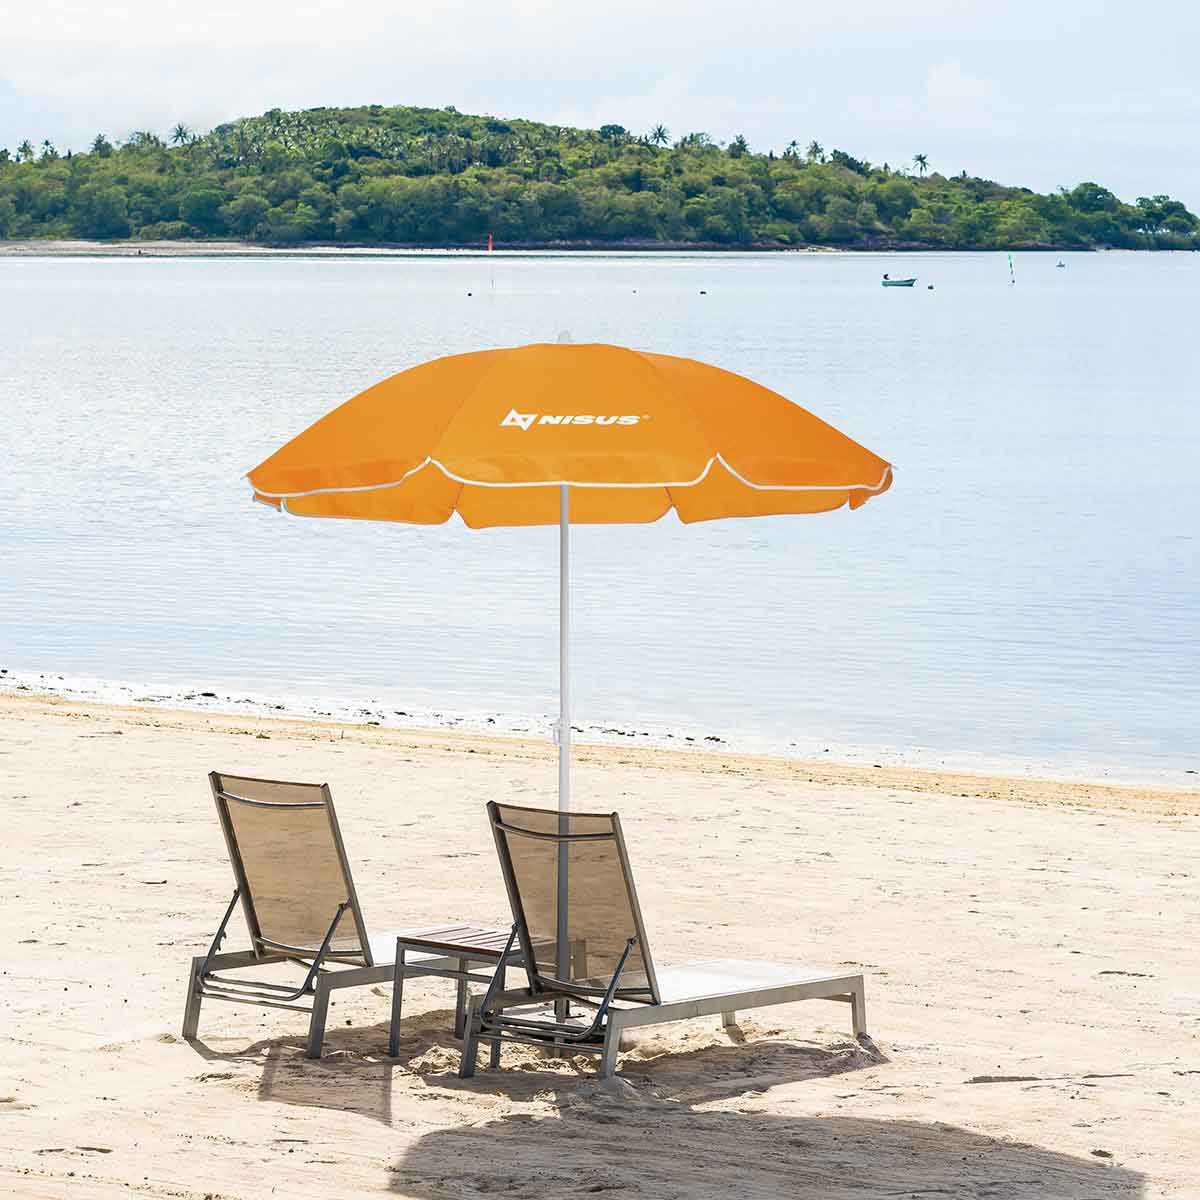 Orange Folding Beach Umbrella standing between the two loungers at the beach